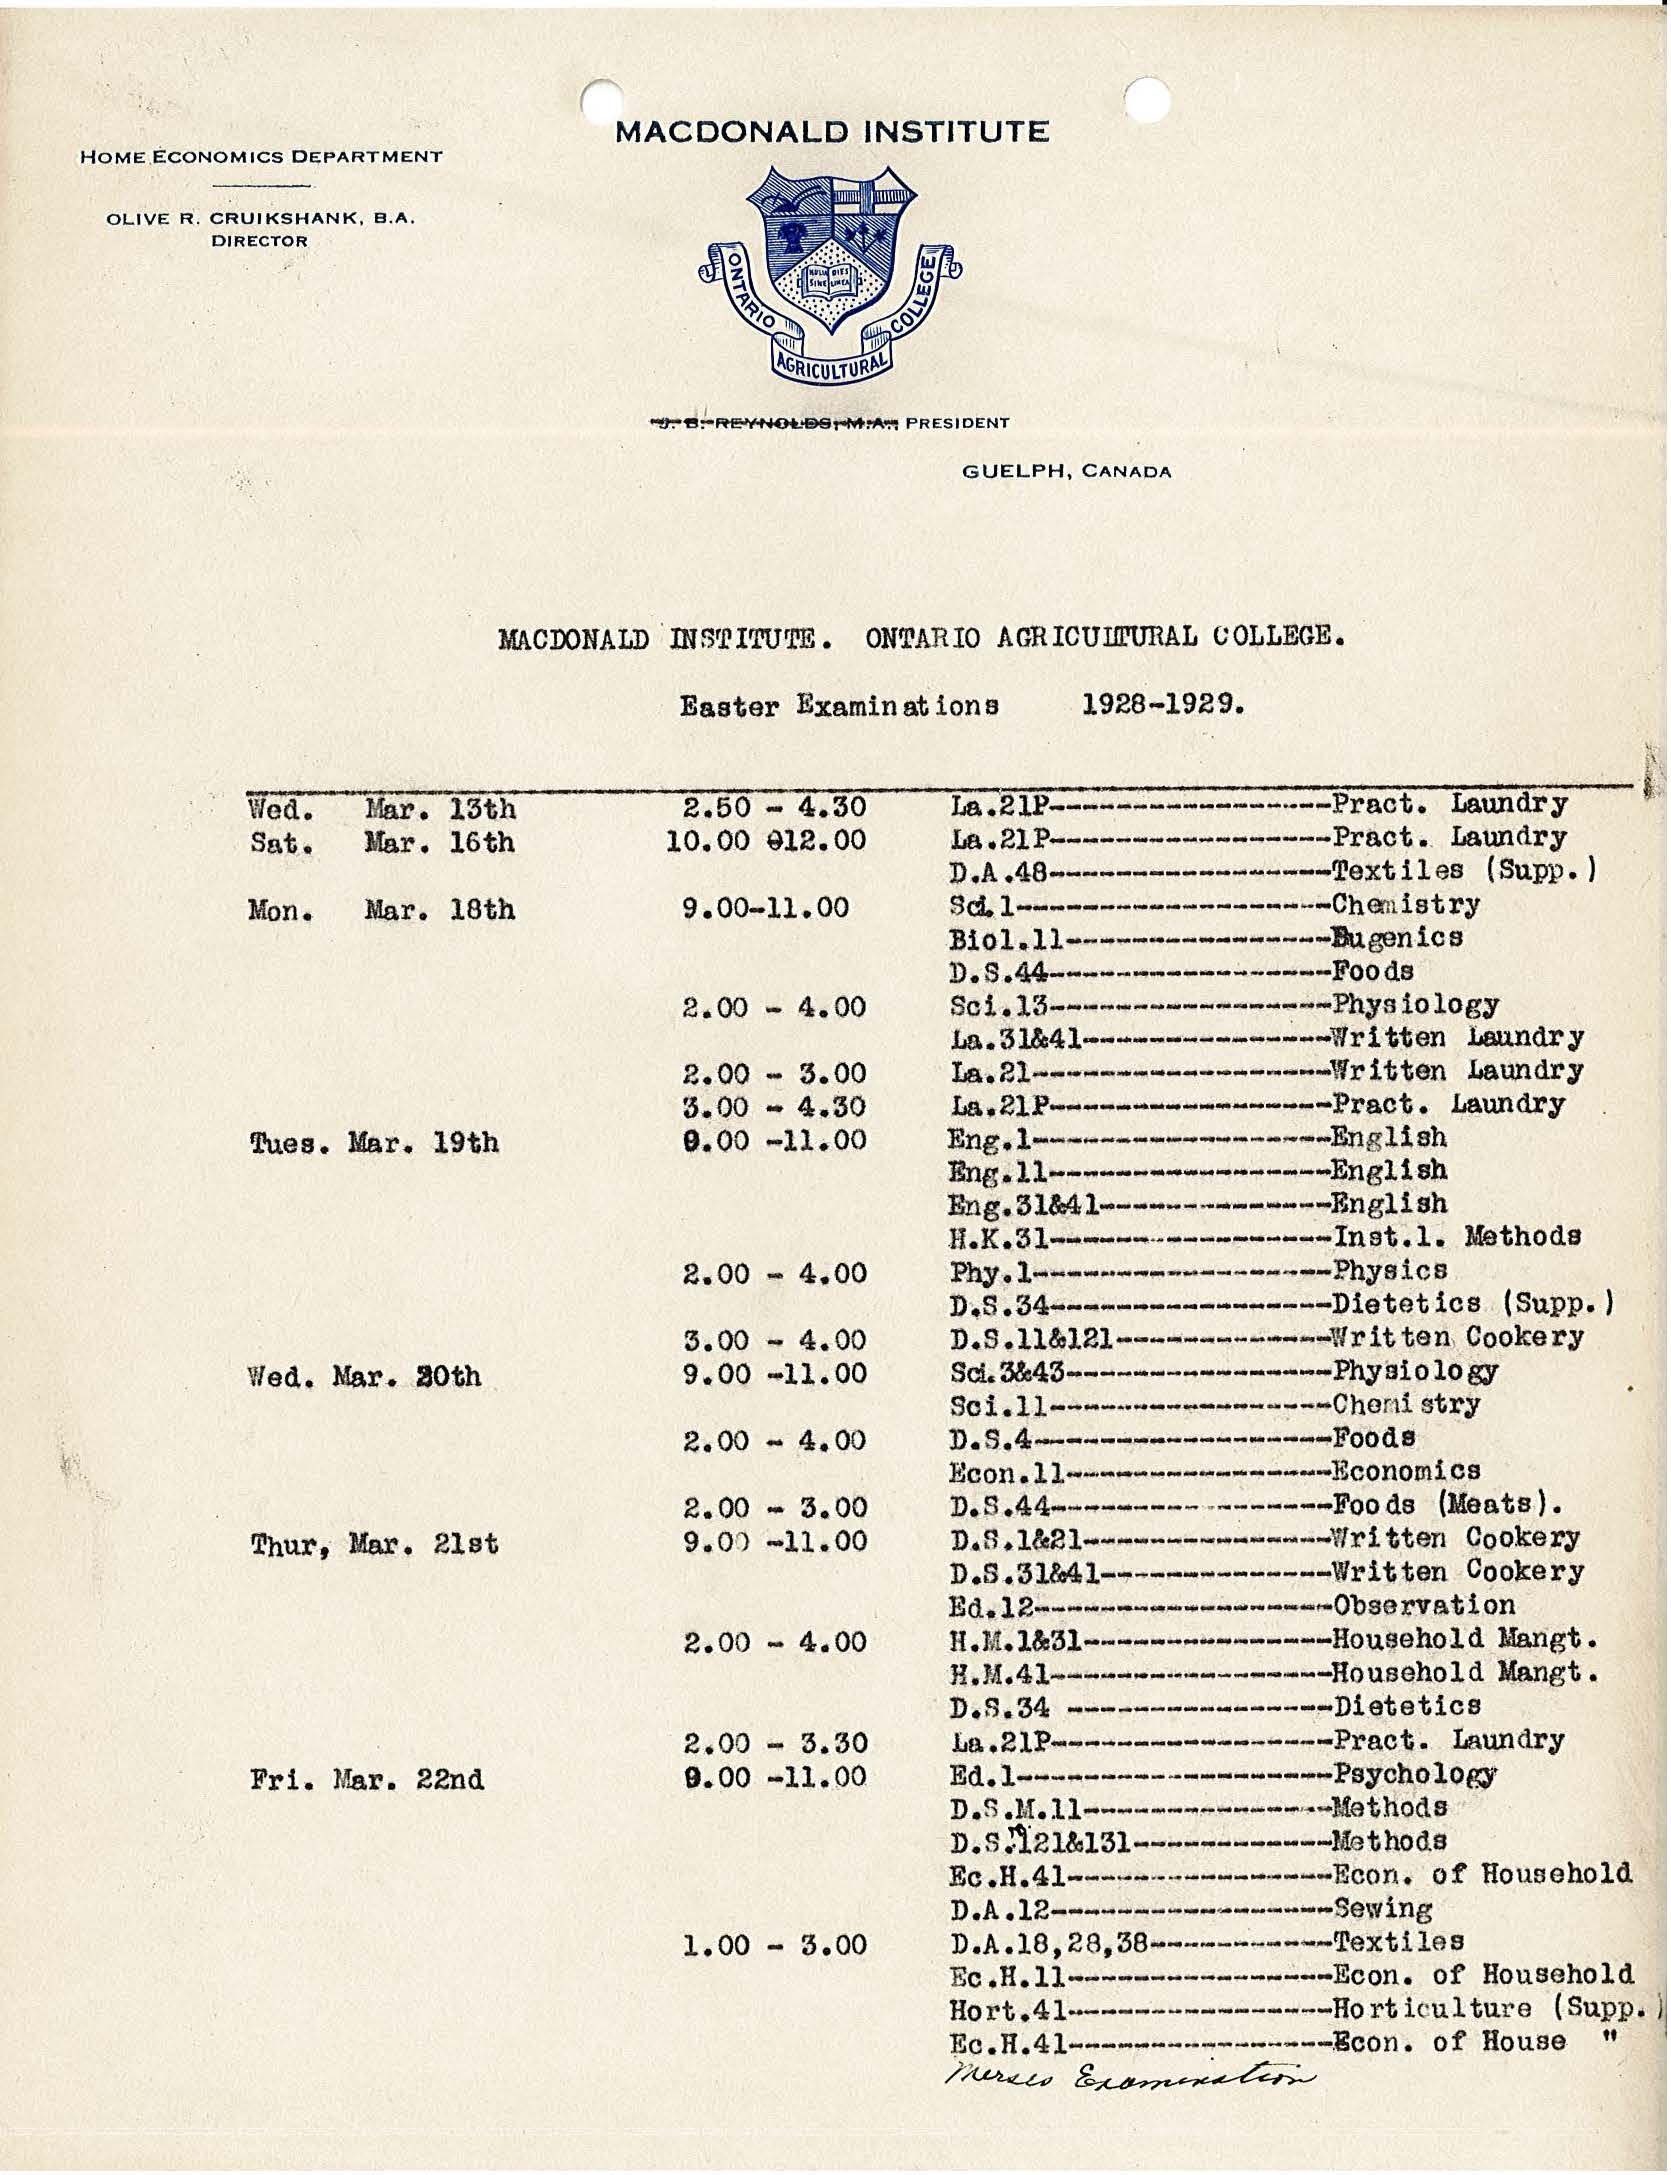 A Macdonald Institute exam timetable from 1928-1929. Eugenics is one of the course exams listed.